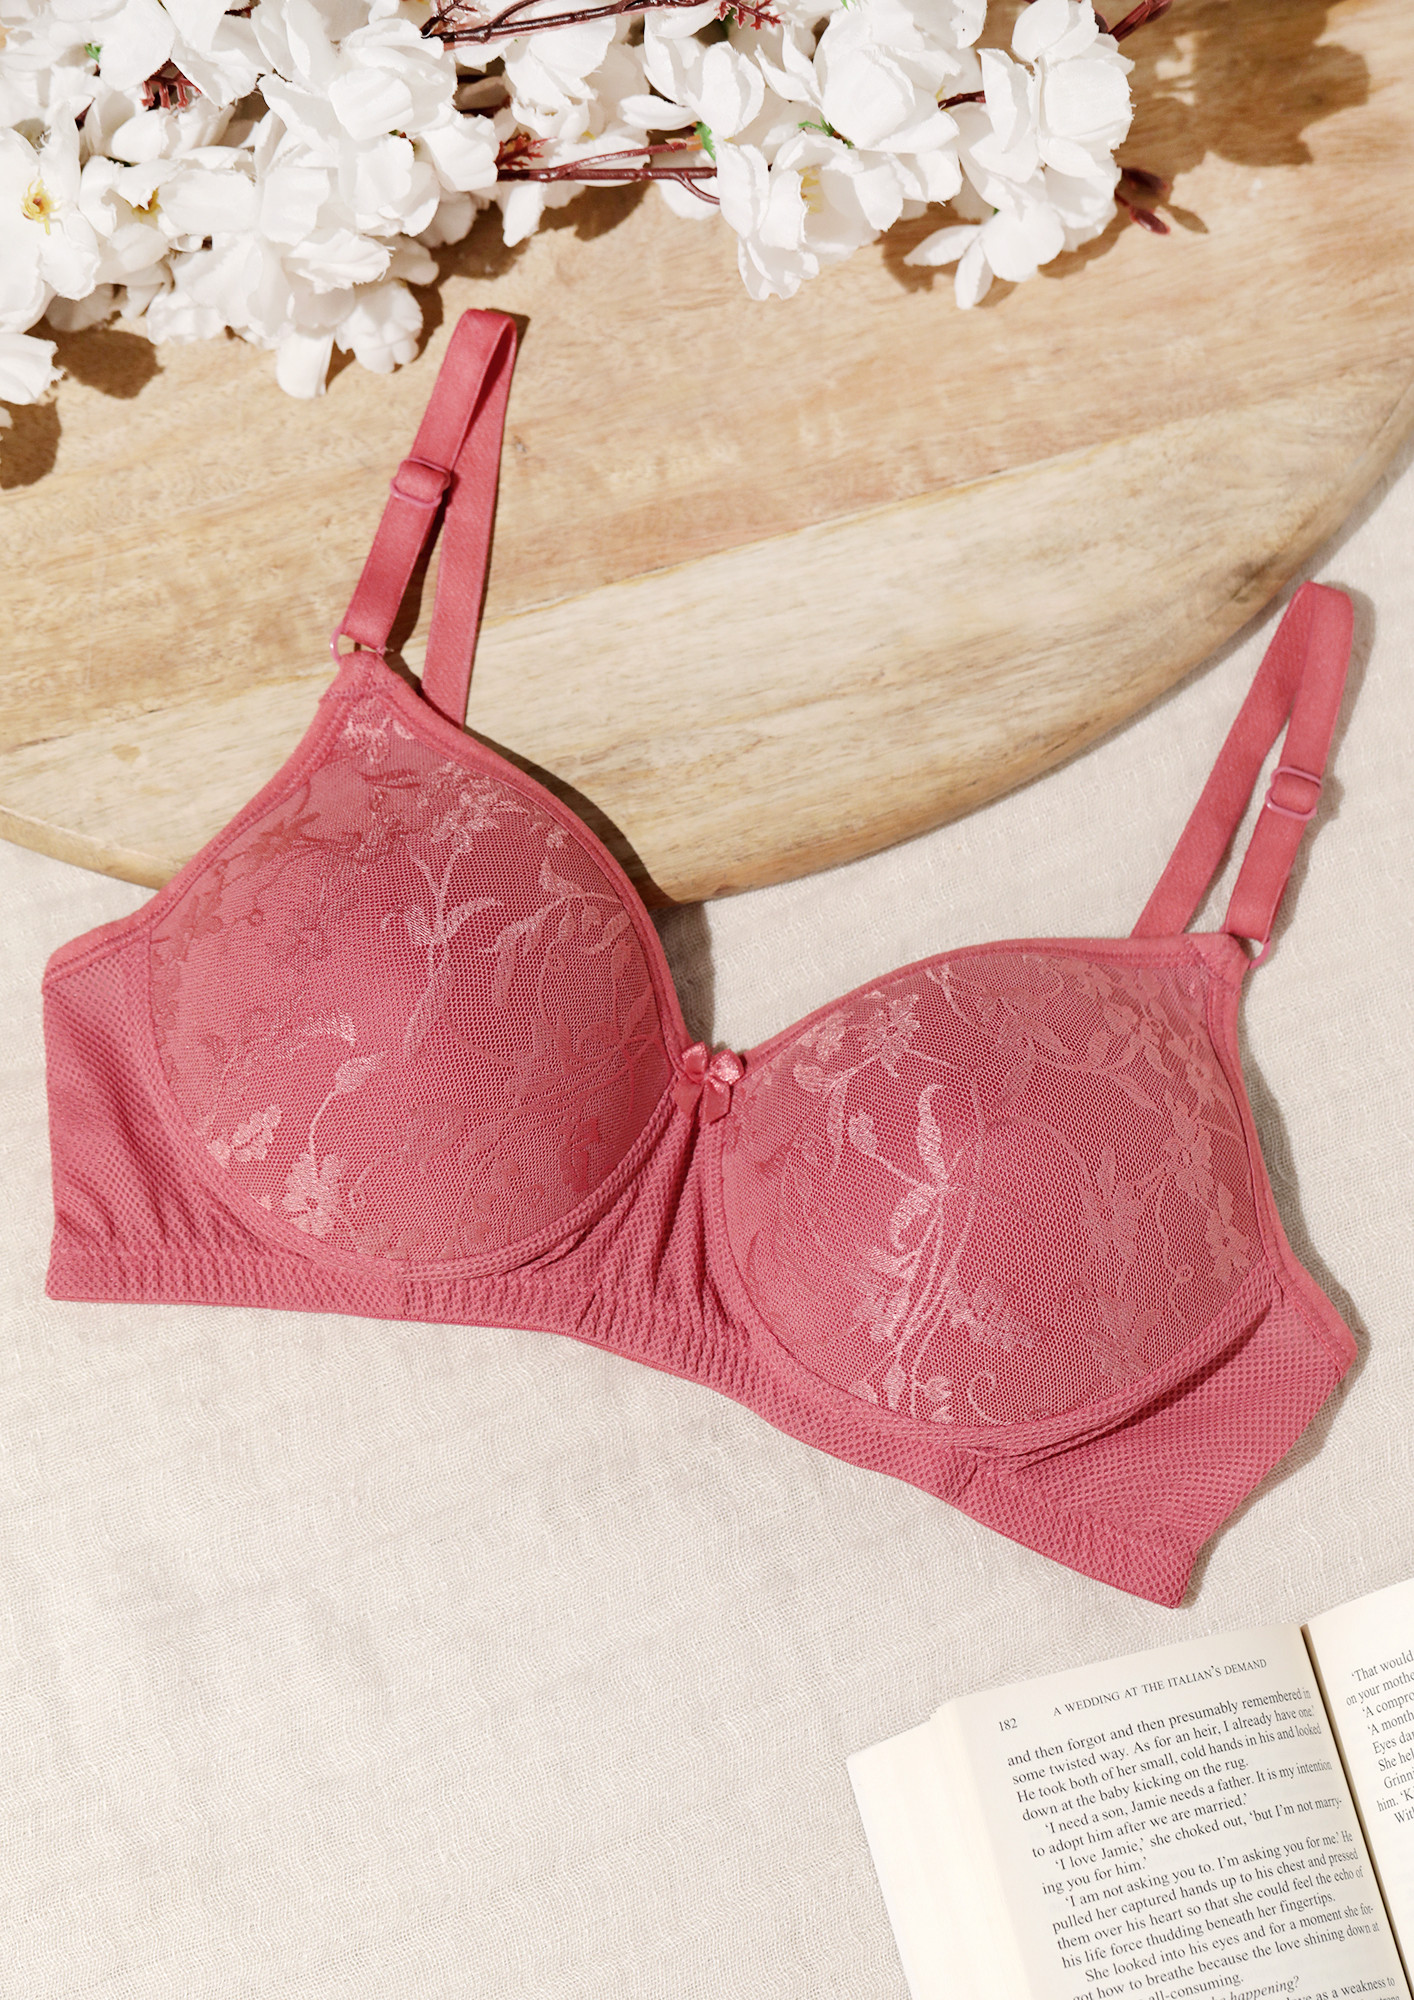 Little Lacy Pink Lace Bra Price in India, Full Specifications & Offers